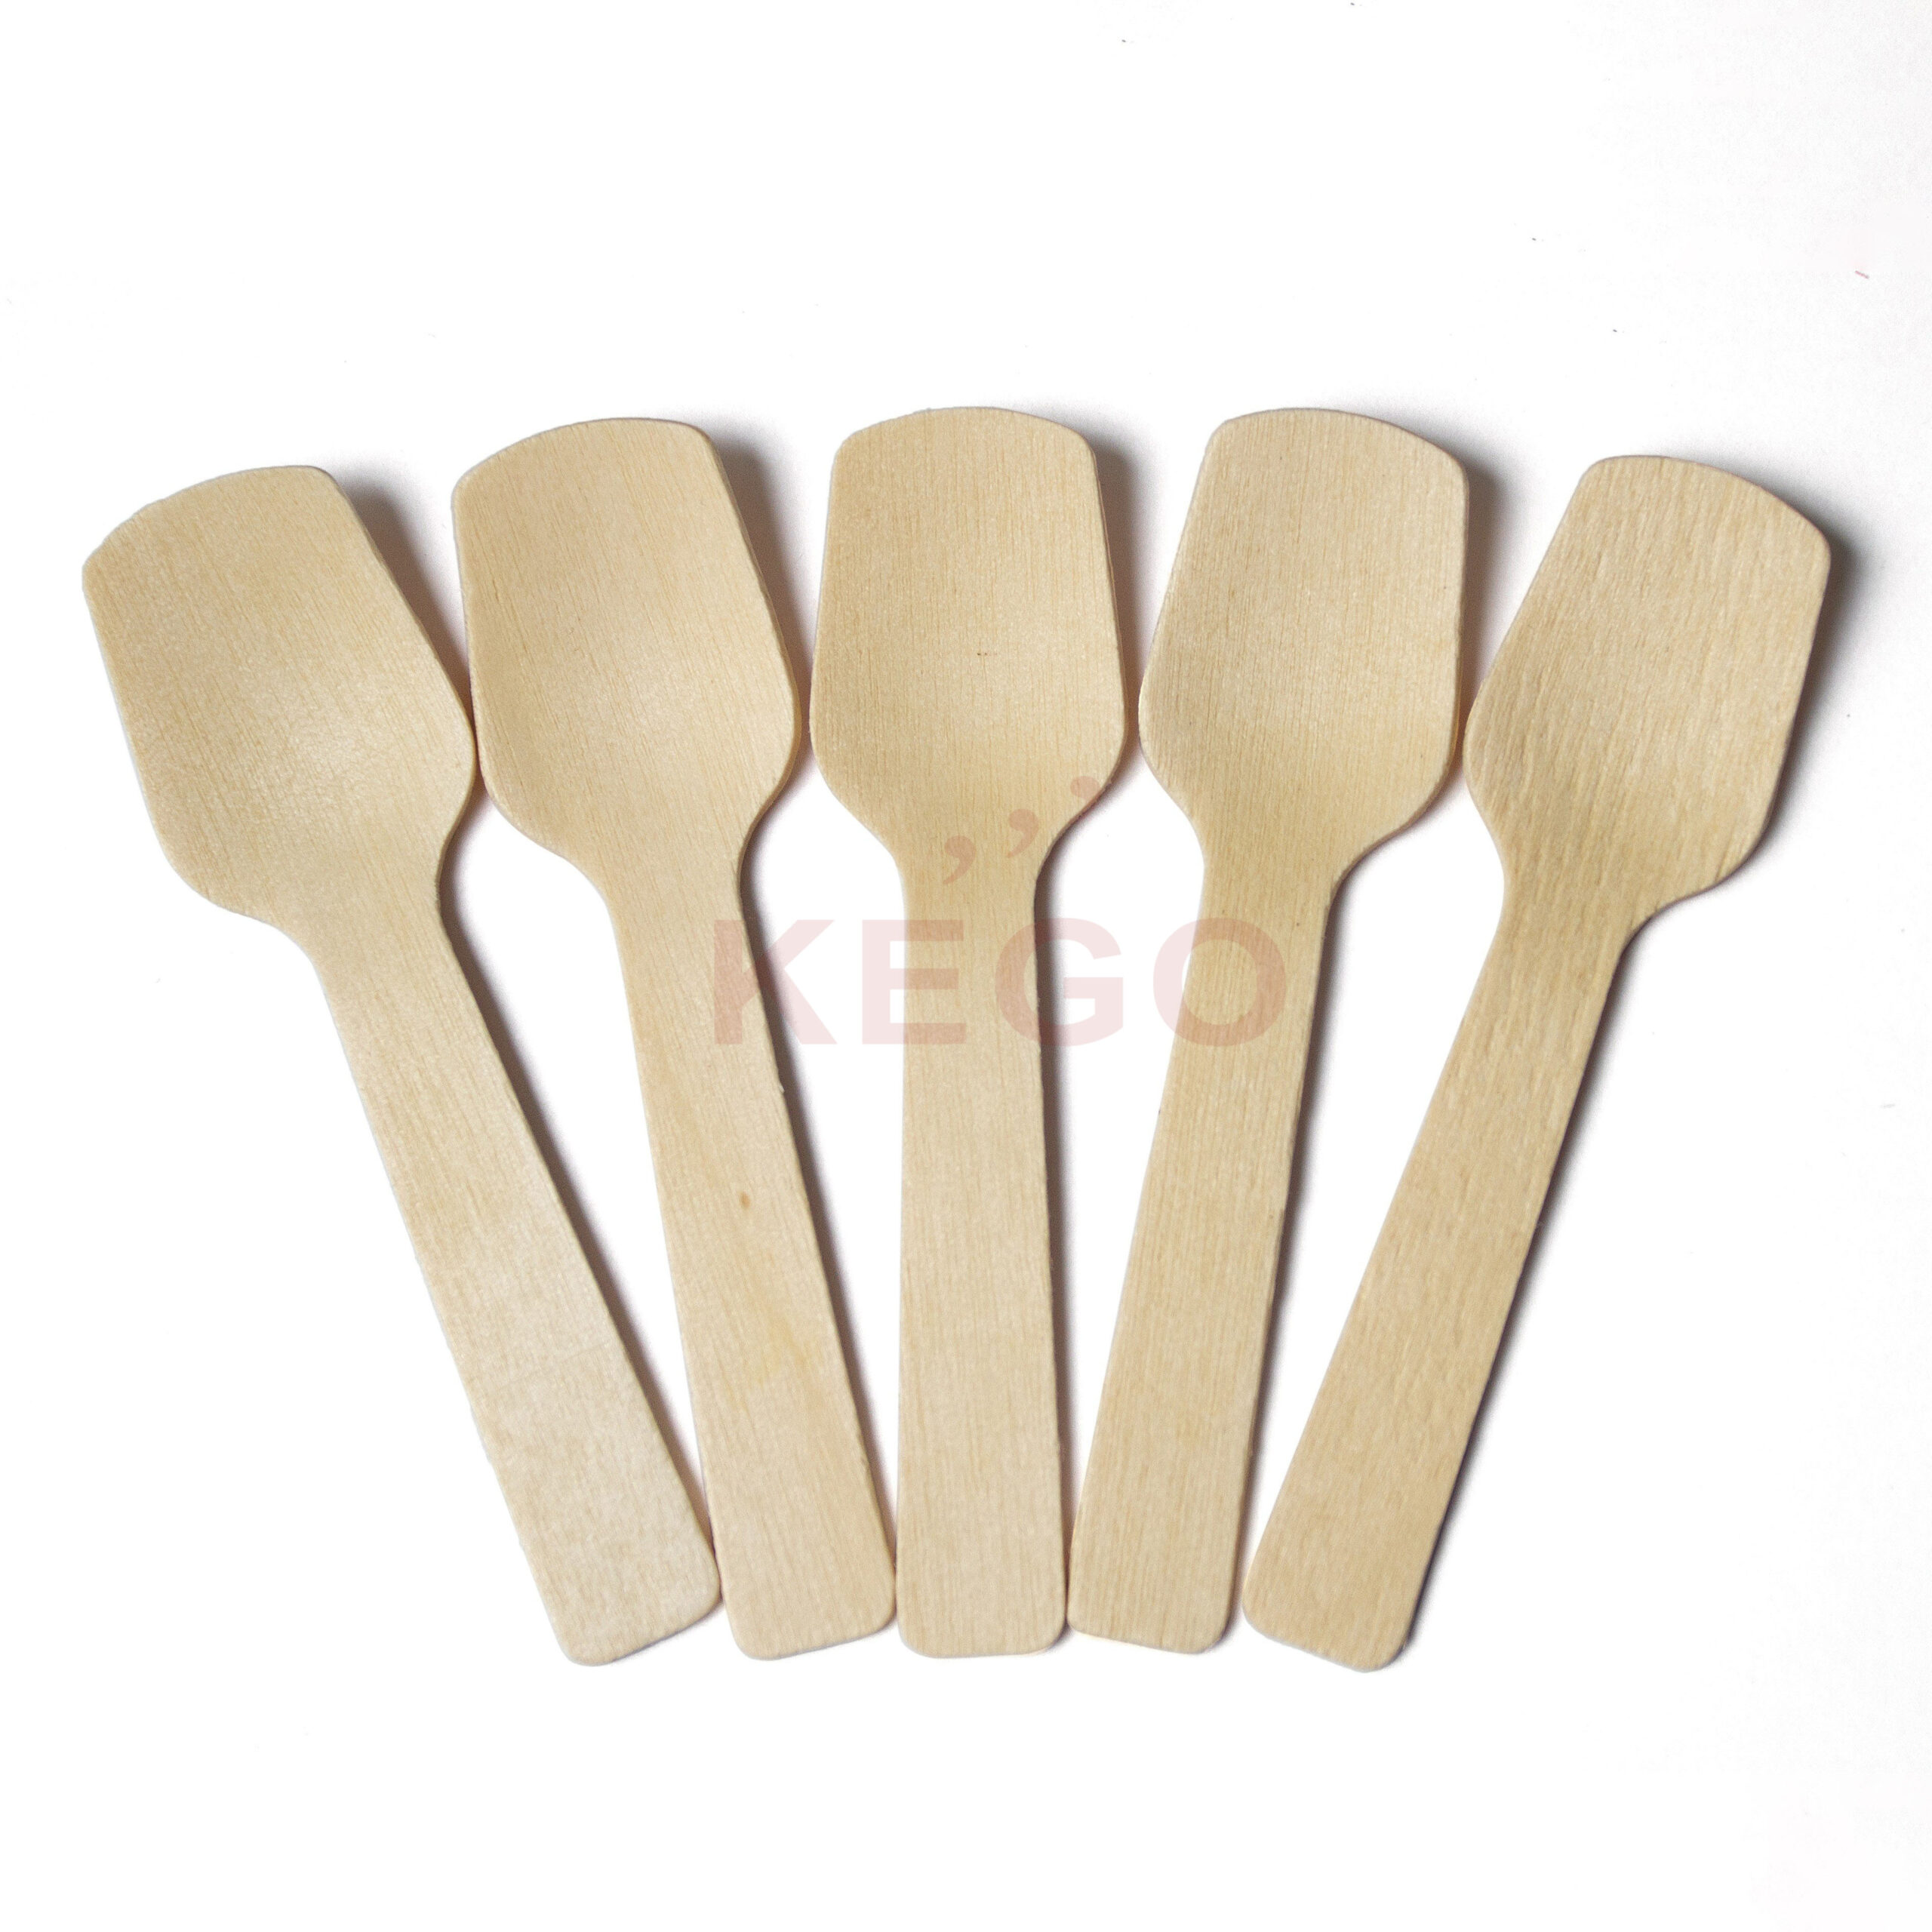 https://kego.vn/wp-content/uploads/2016/10/Disposable-Wooden-Spoon-95-2-scaled.jpg